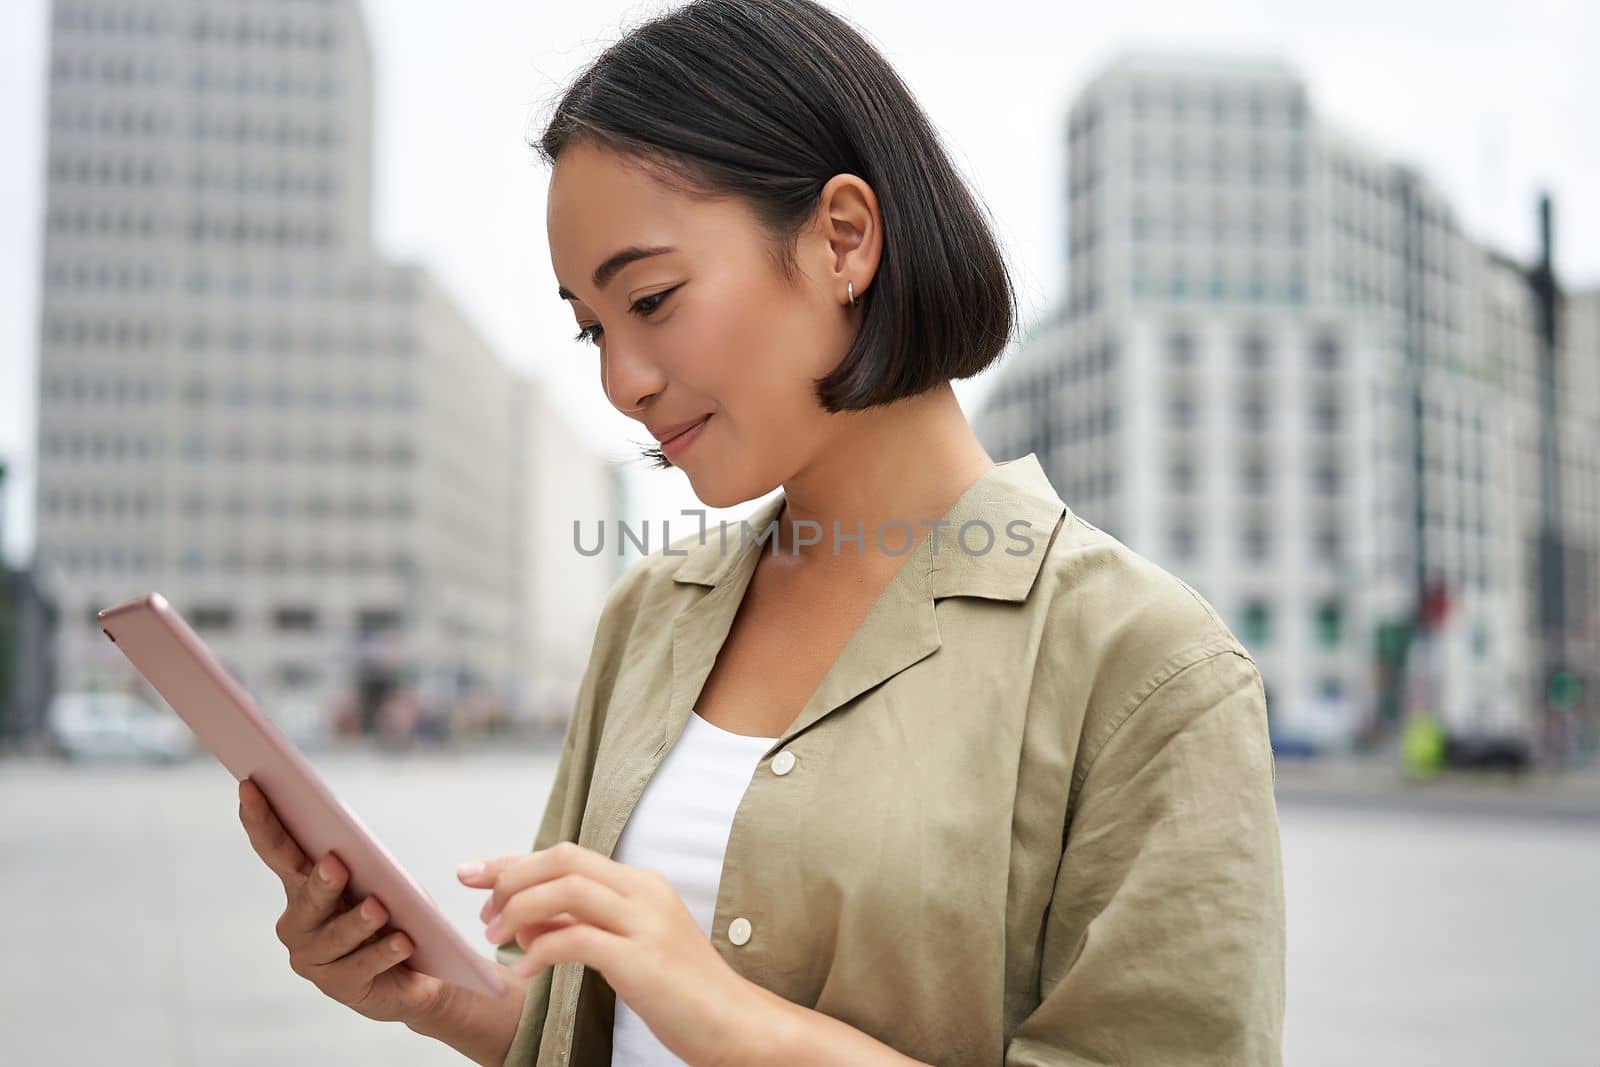 Portrait of asian woman reading, using tablet while standing on street, smiling while looking at screen.